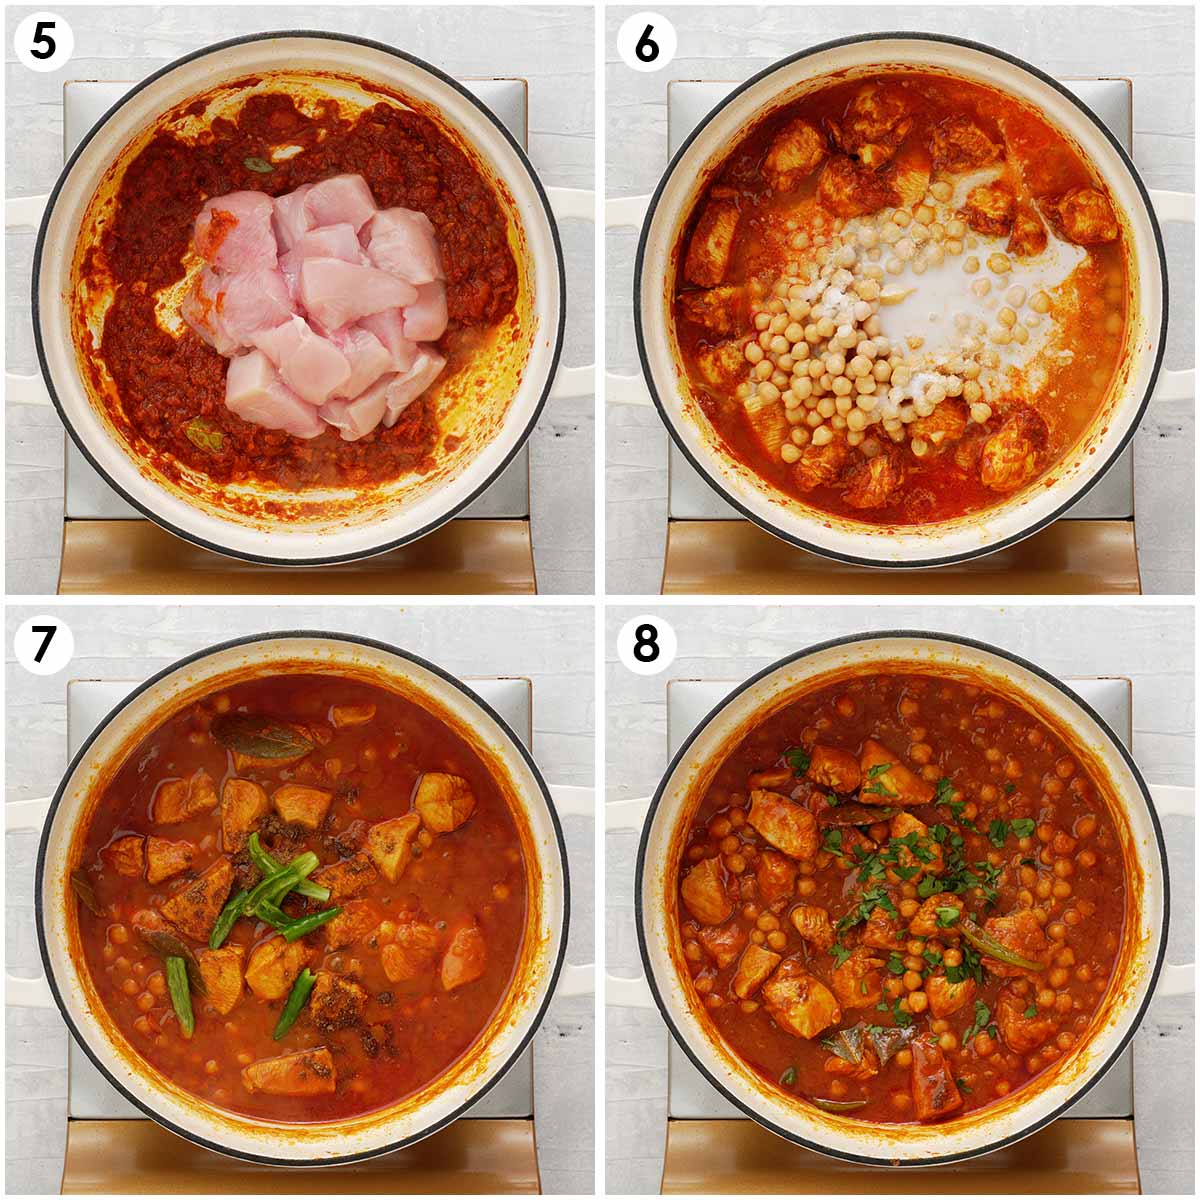 Four image collage showing how to cook chicken and chickpea with coconut milk.